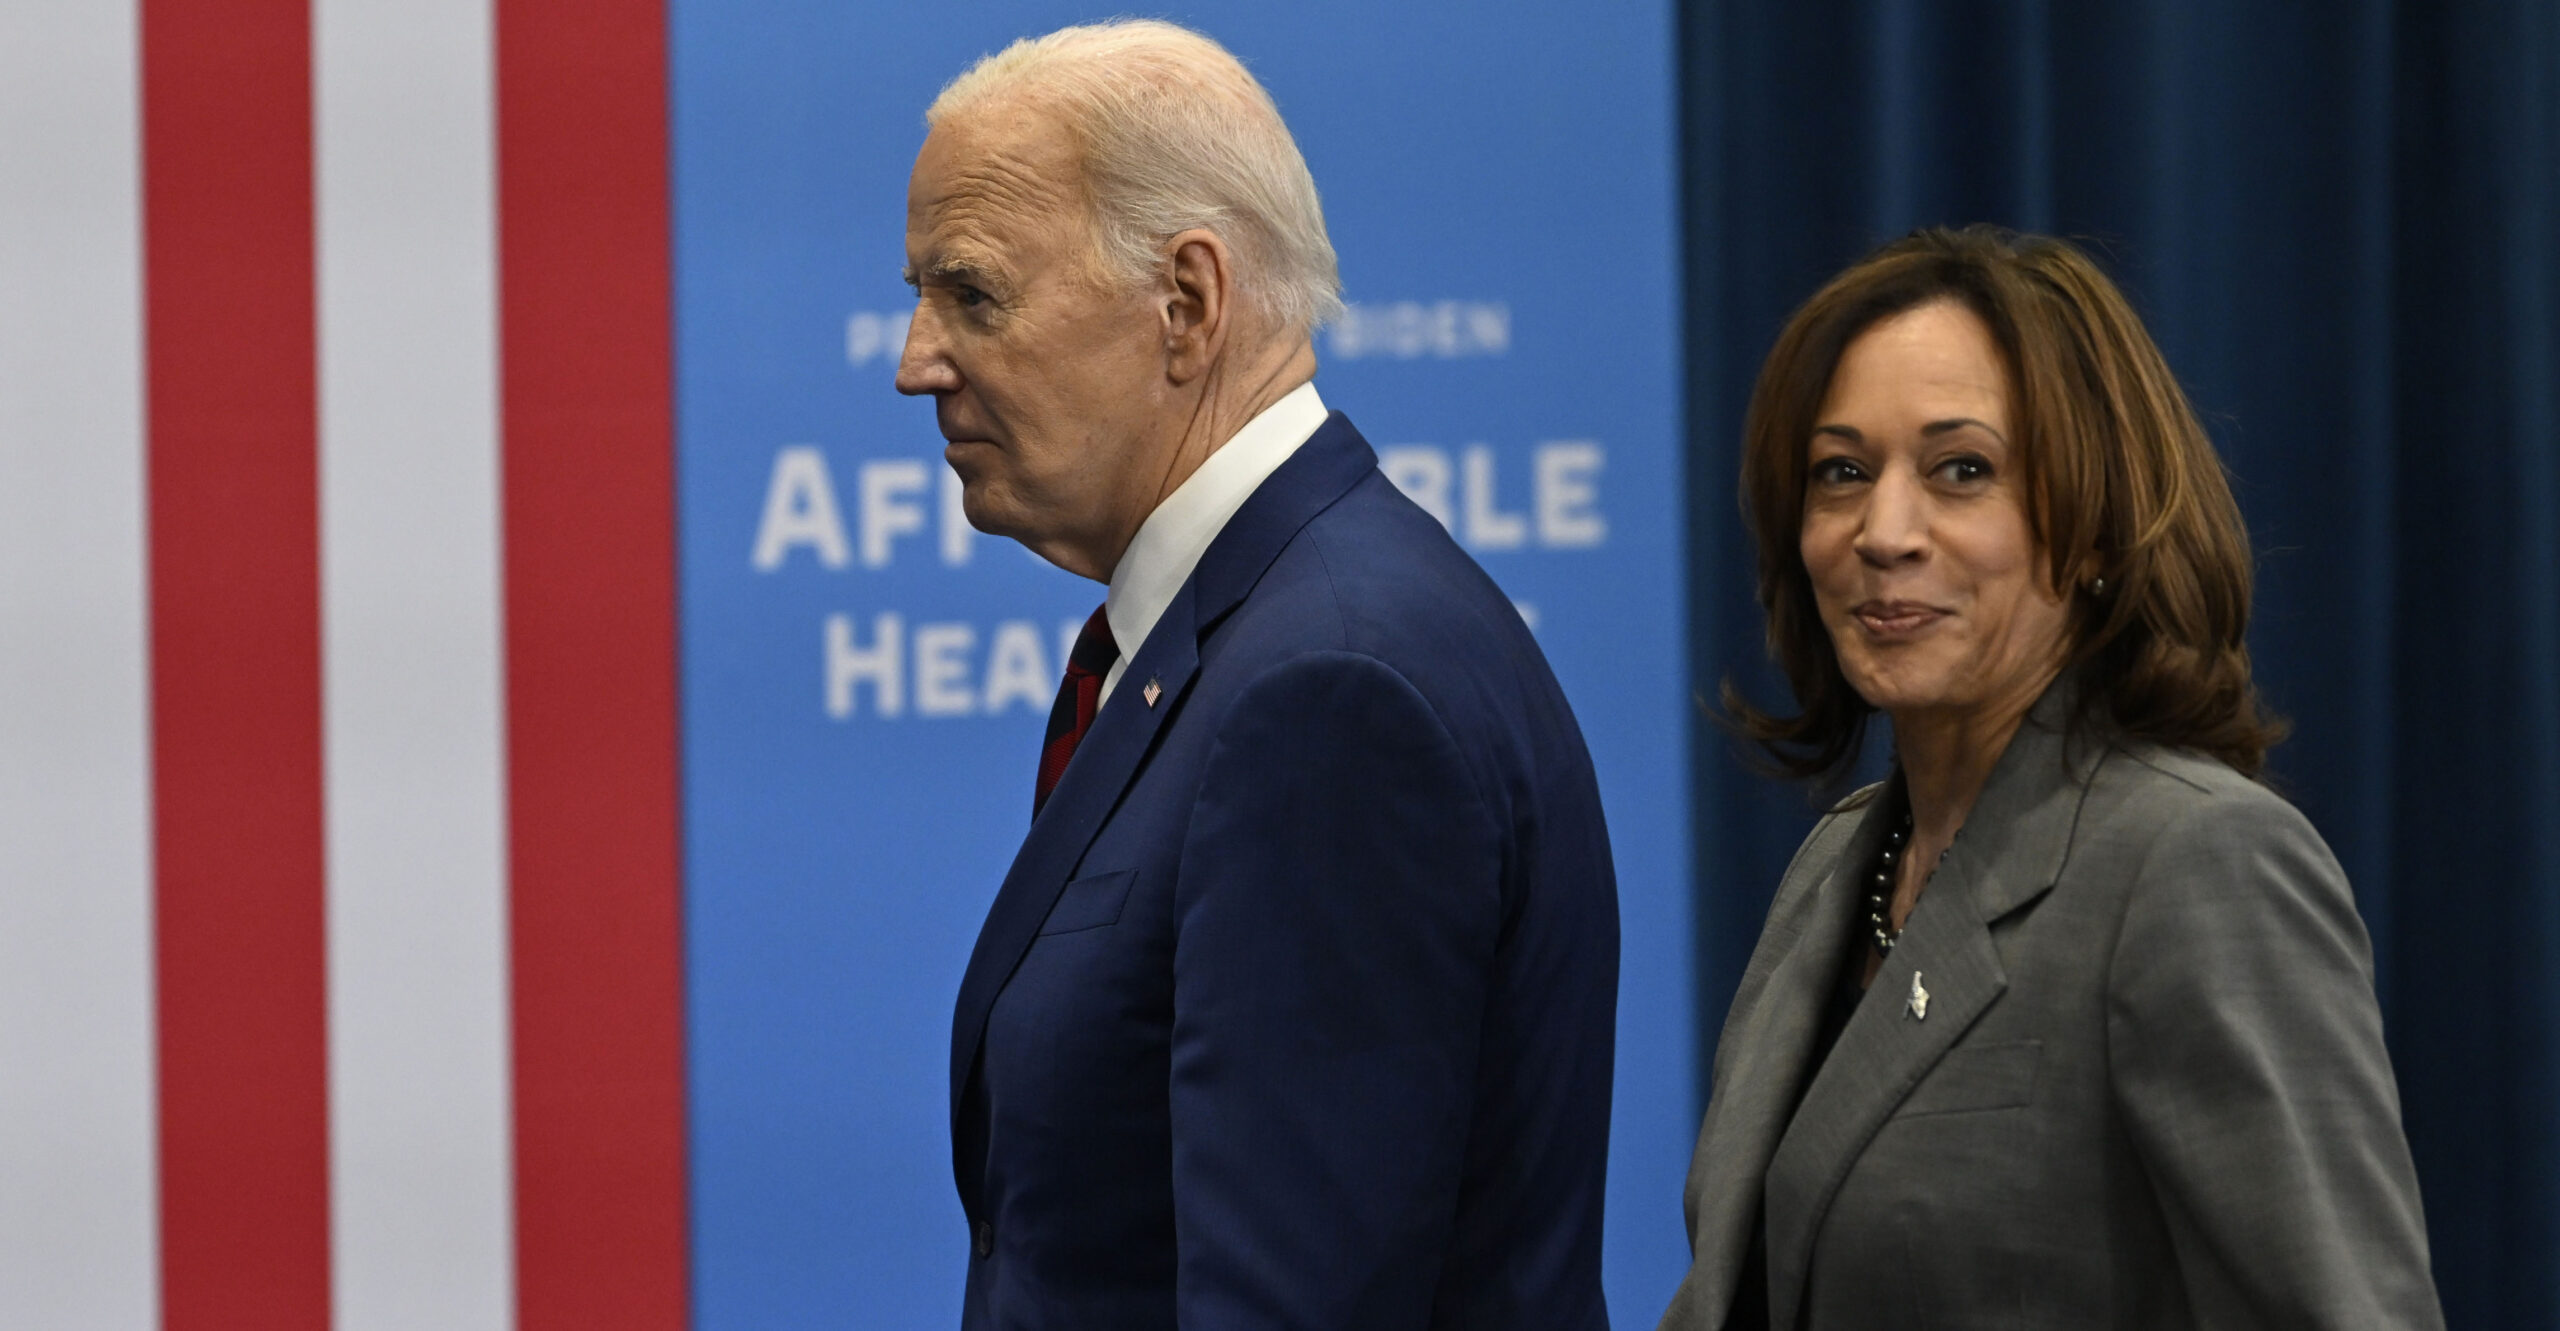 Biden Protects Deep State Bureaucrats With 'Anti-Democratic' Rule